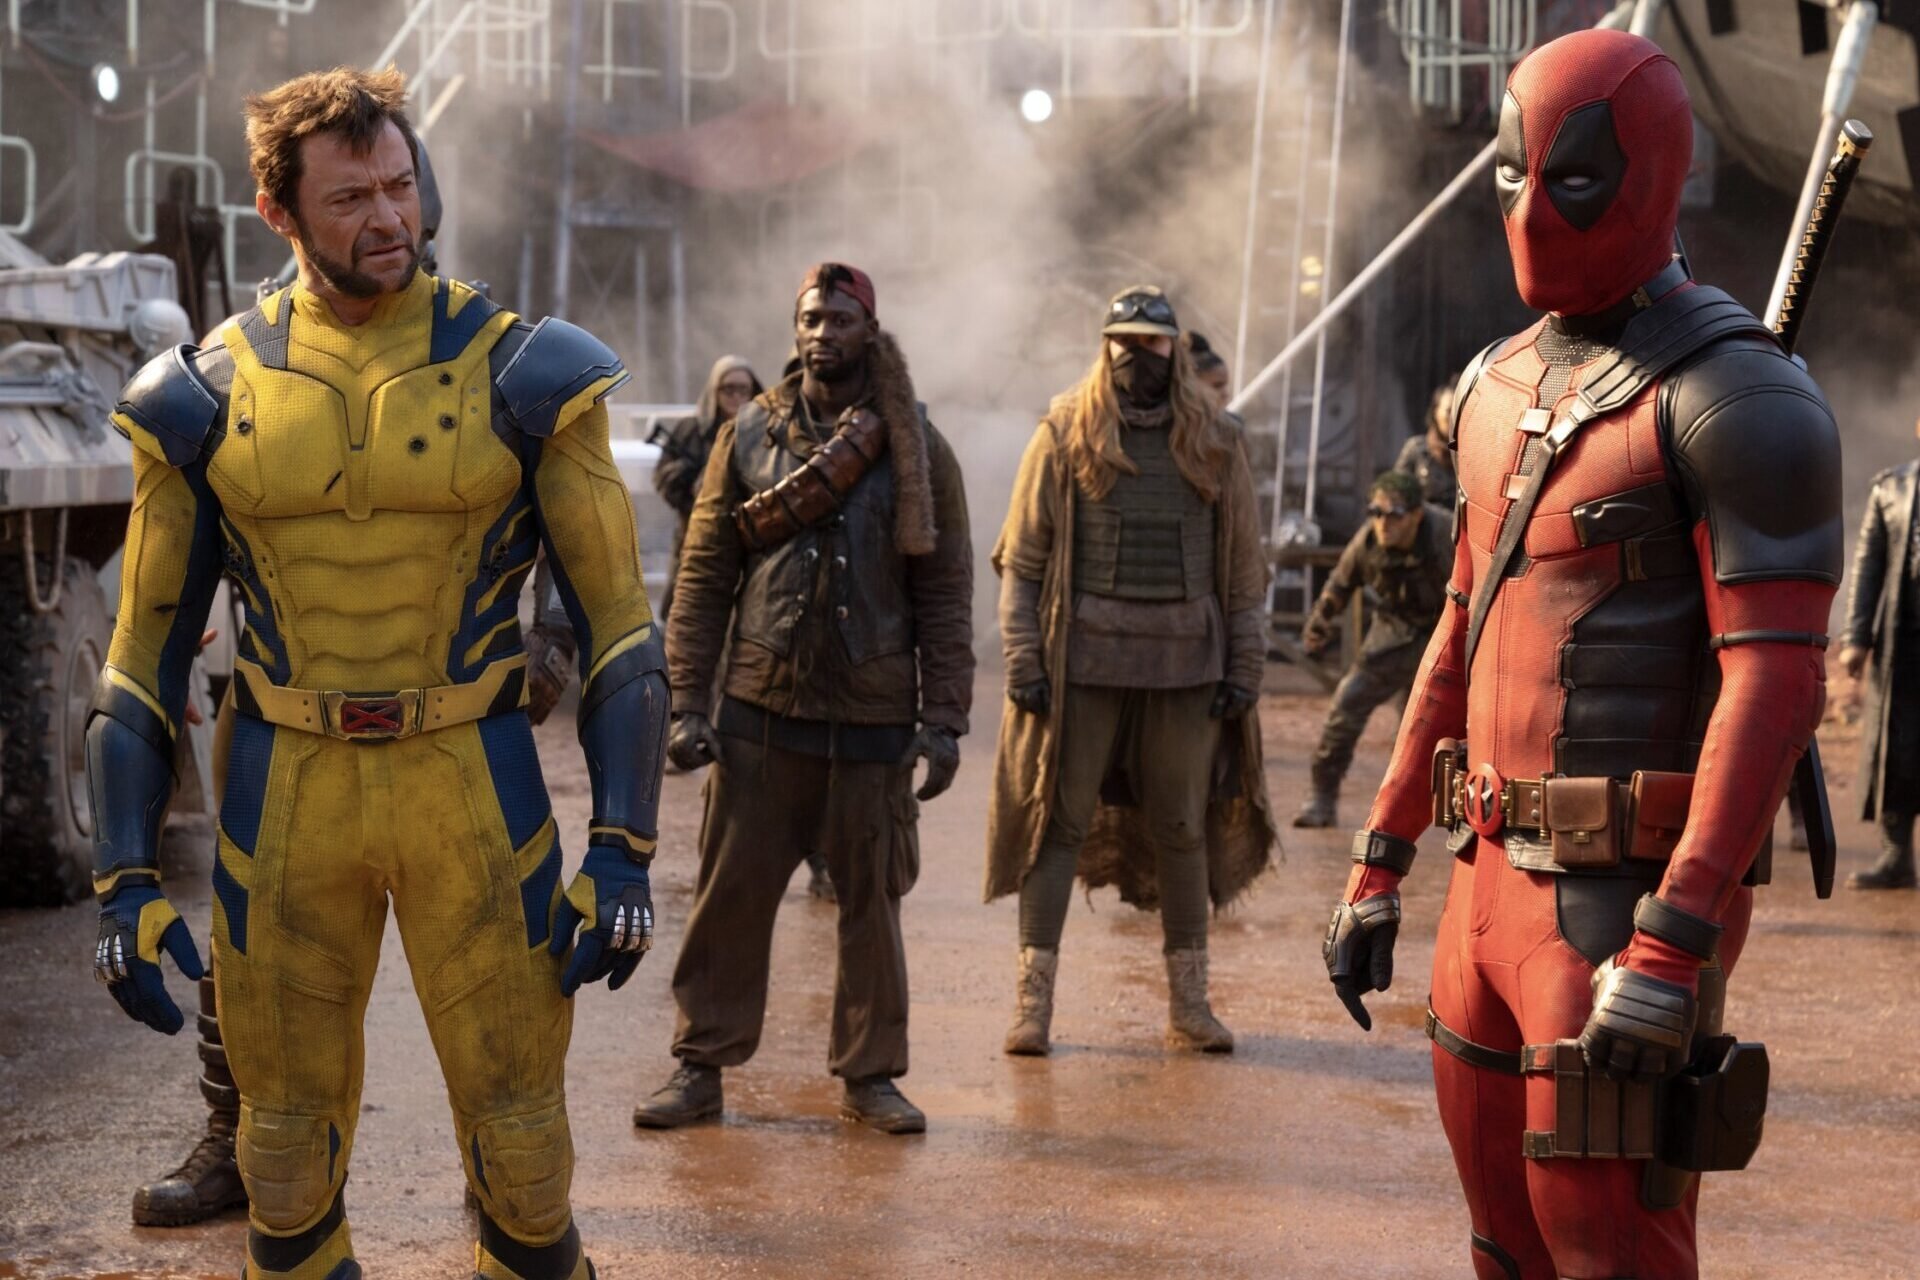 'Deadpool & Wolverine': Everything Marvel fans could want